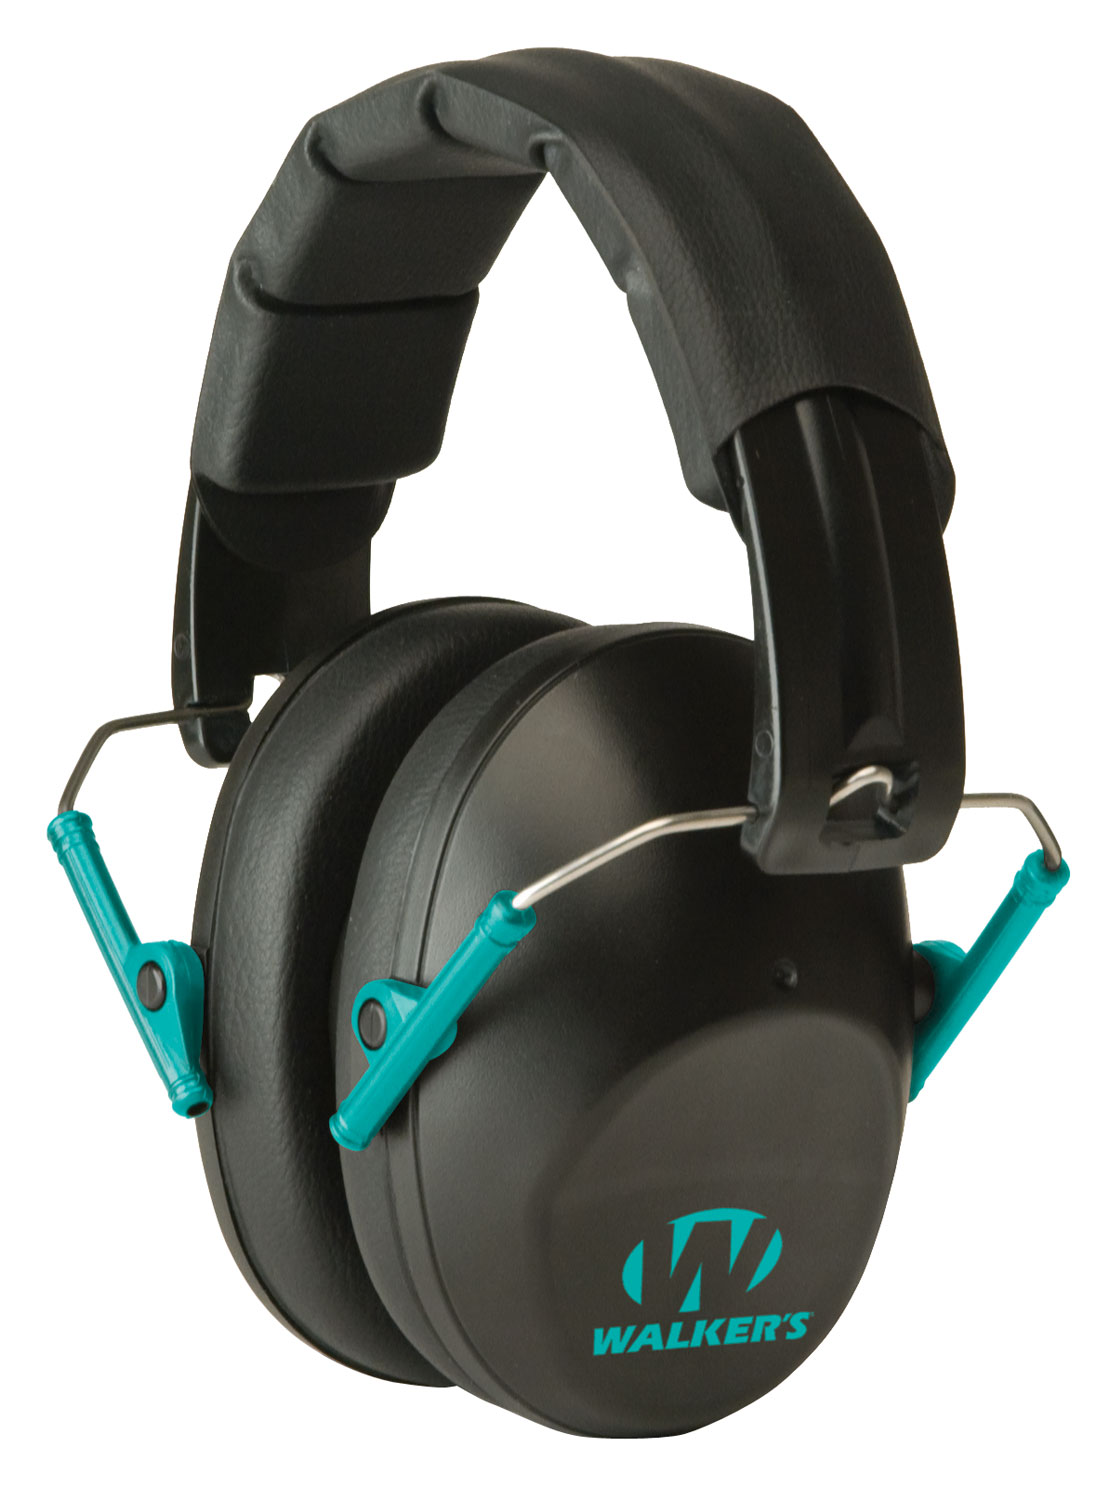 Walkers GWPFPM1BKTL Pro Low Profile Muff Polymer 22 dB Folding Over the Head Black Ear Cups with Black Headband & Teal Accents Adult